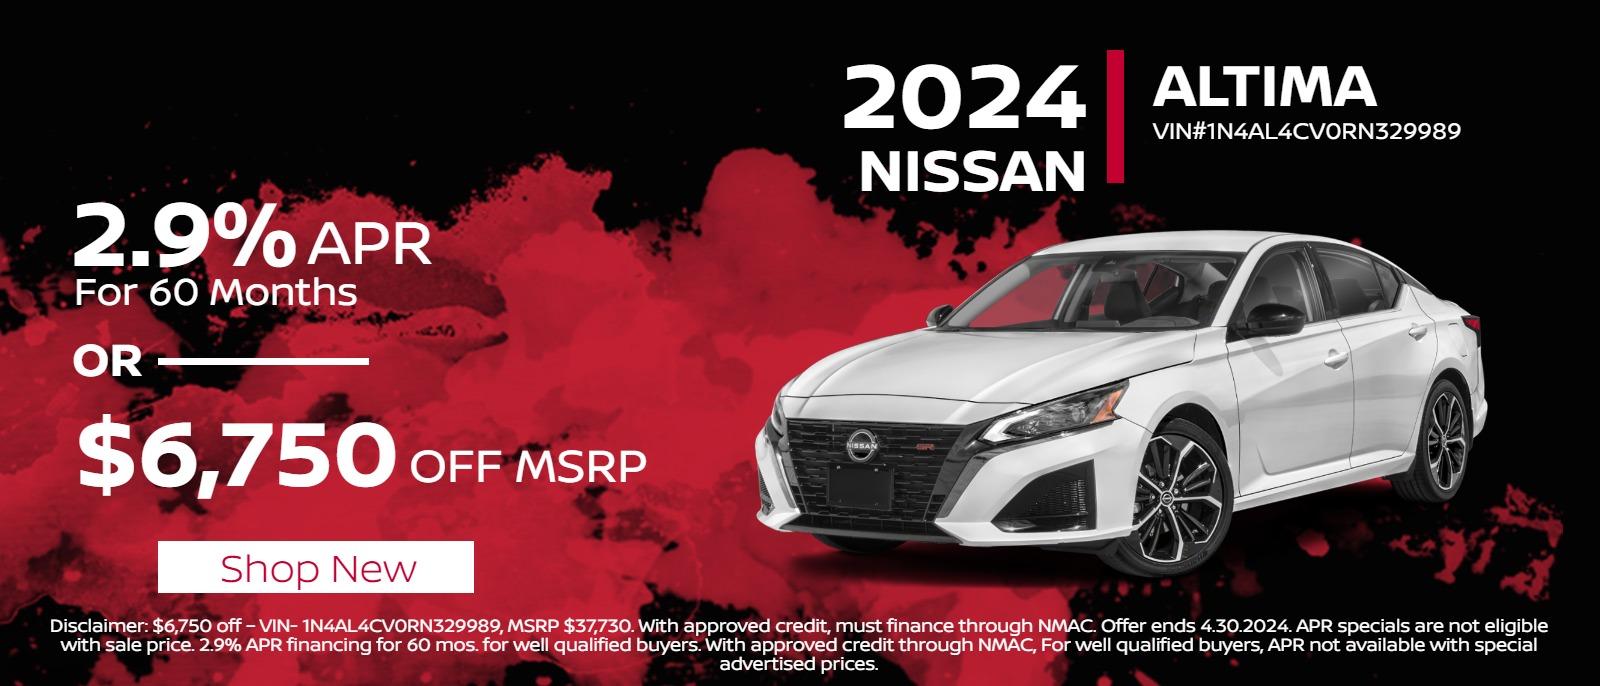 2024 Altima 
2.9% APR for 60 months 
or 
$6,750 off MSRP